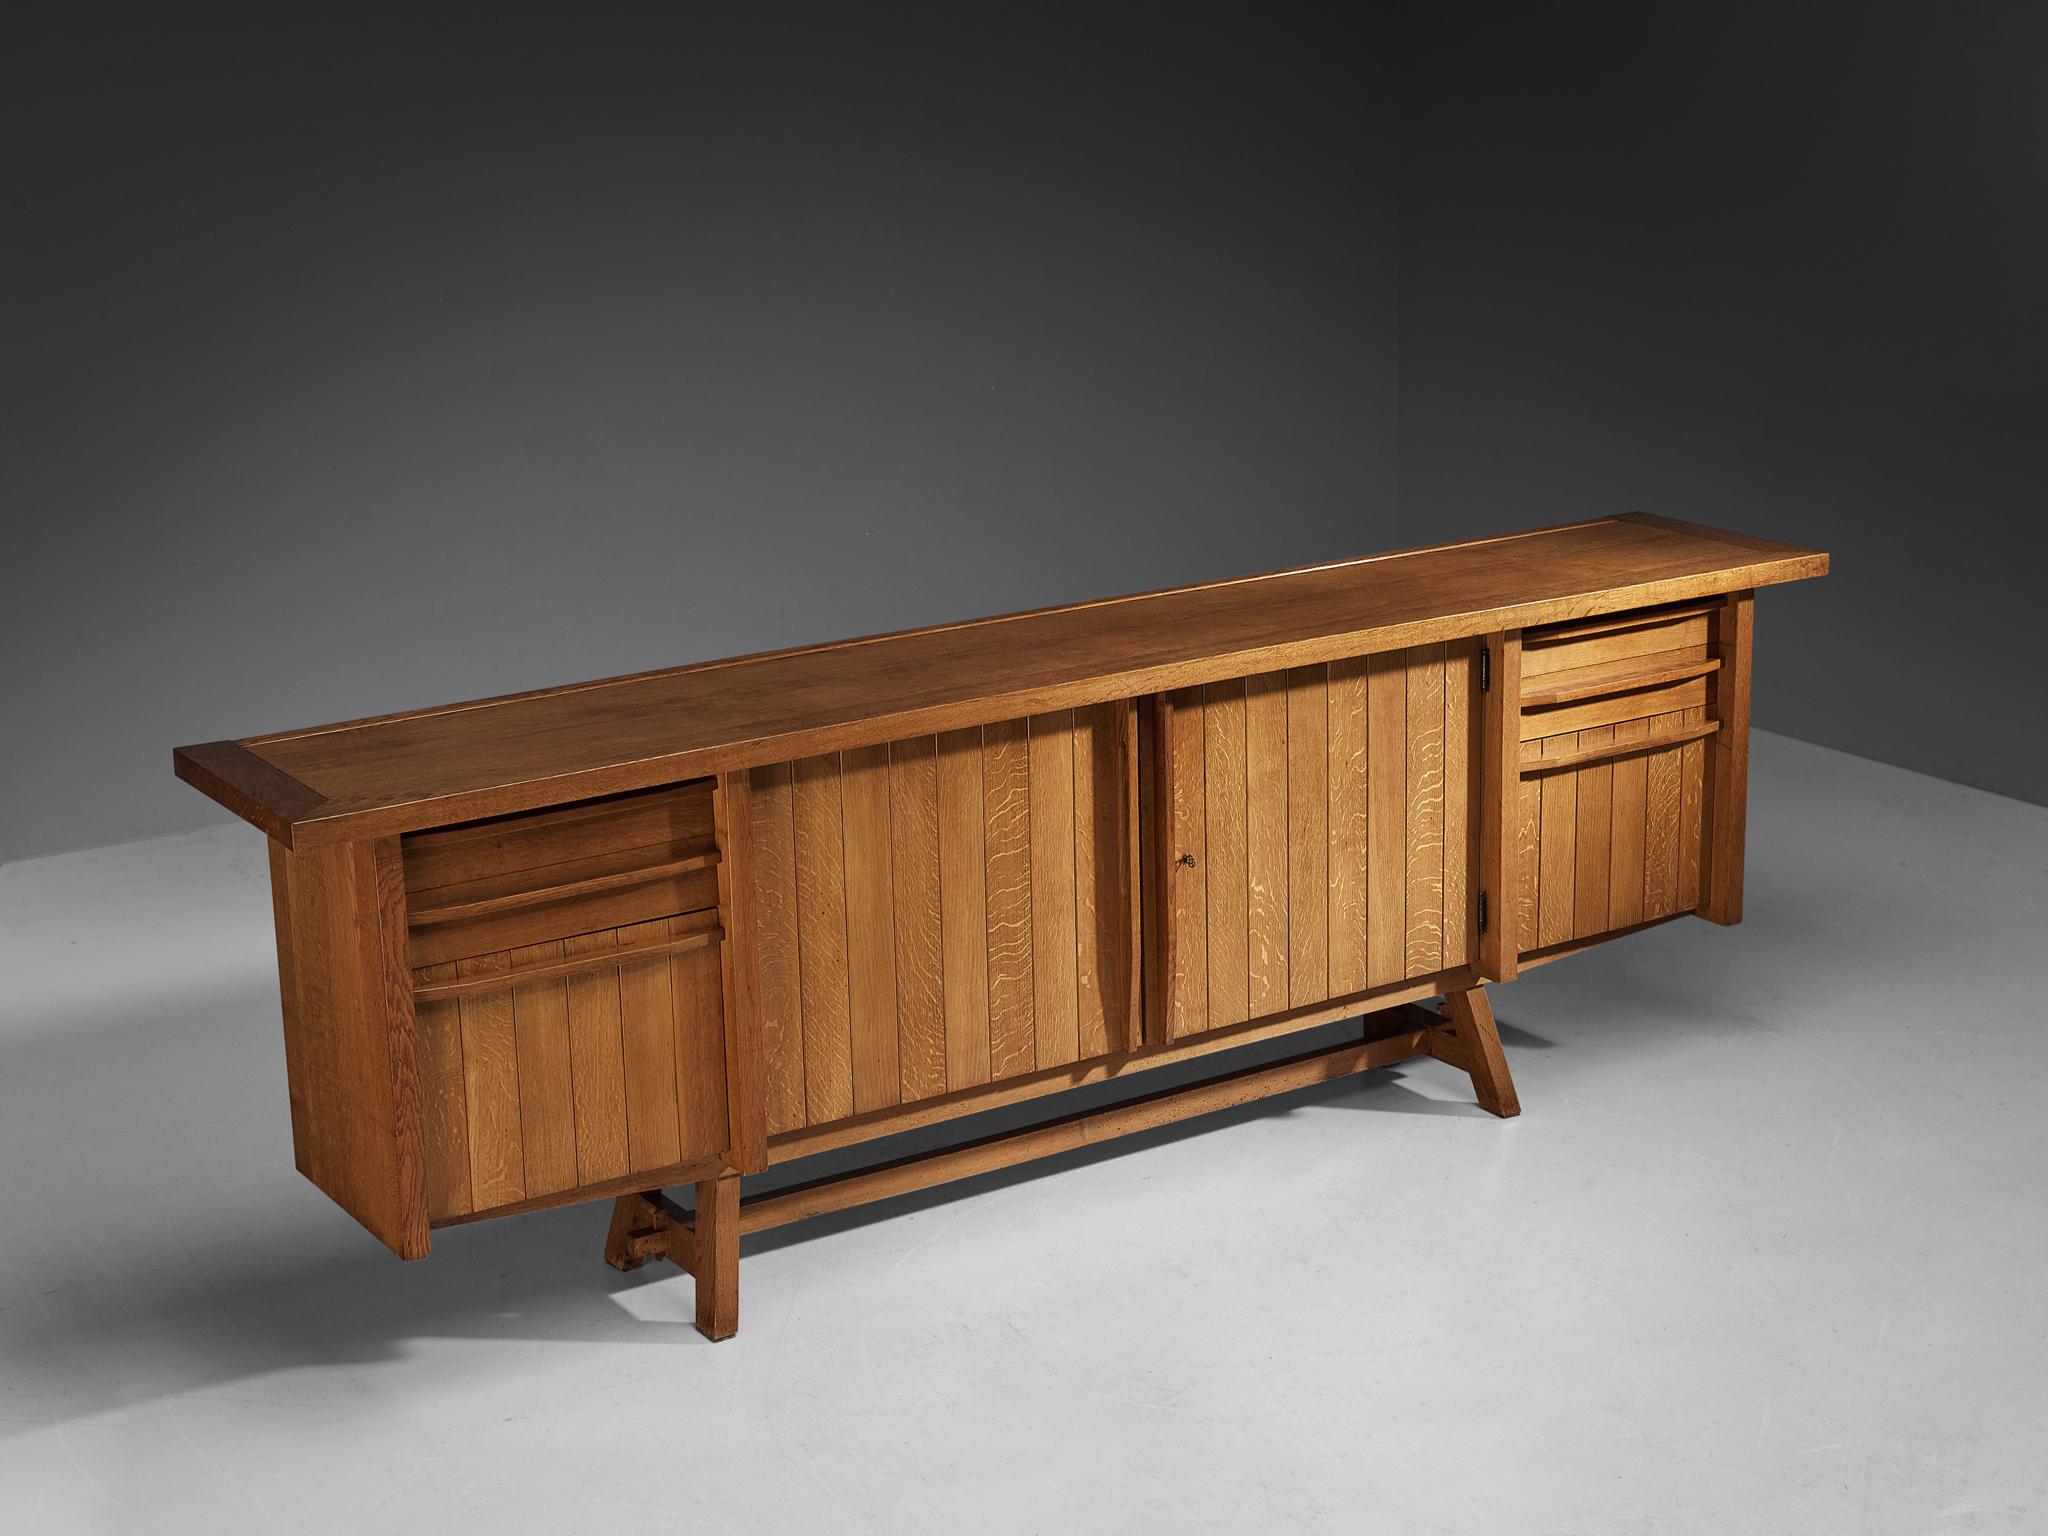 Sideboard, oak, France, 1960s

Lovely sideboard that comes across sturdy and elegant simultaneously. This piece was designed and manufactured in Europe in the 1960s. The rich grain and color of the wood makes this piece attractive. This design has a